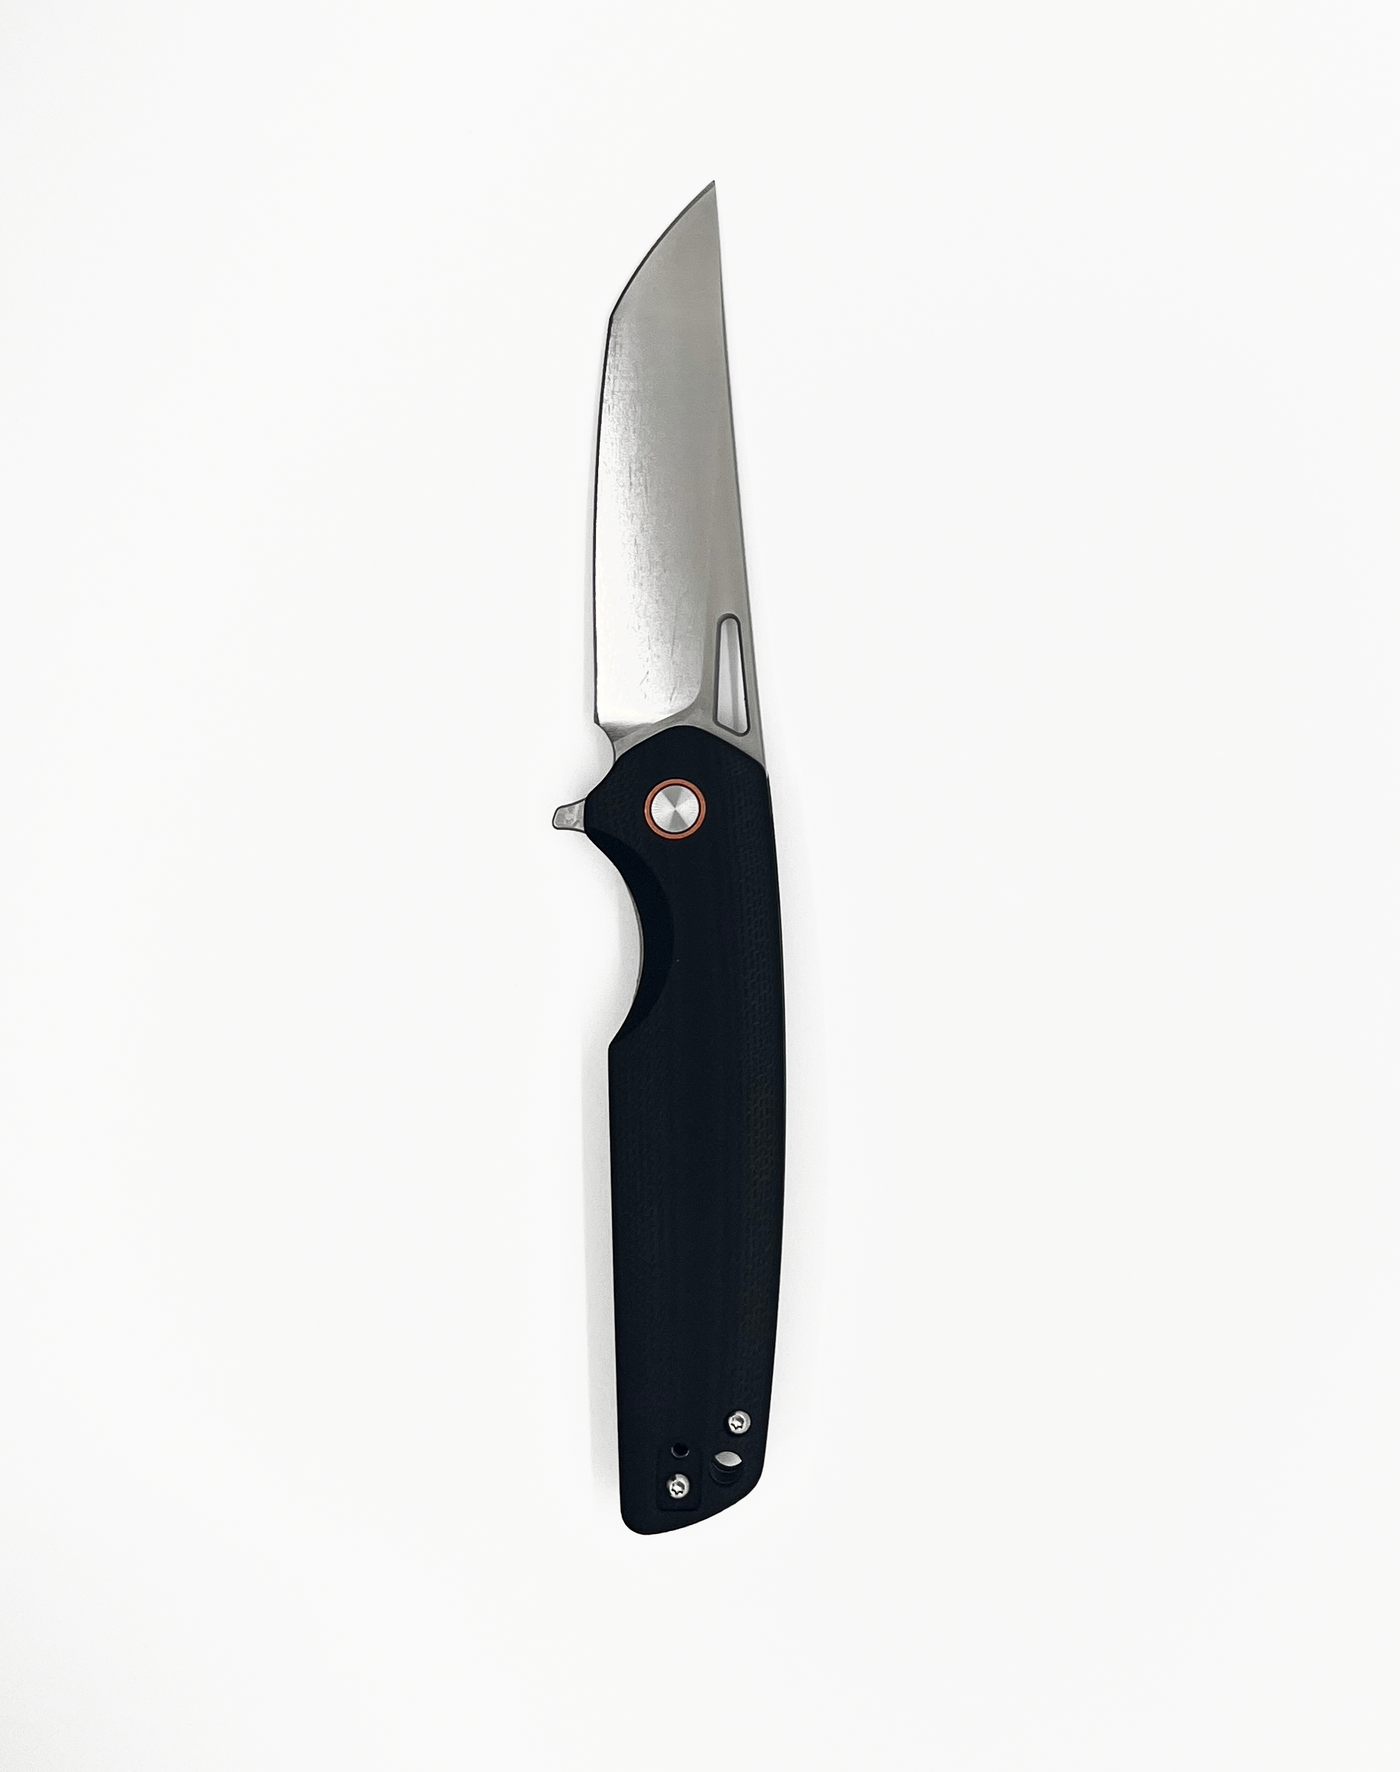 Tanto Blade Folding knife on D2 Steel with Black G10 handles